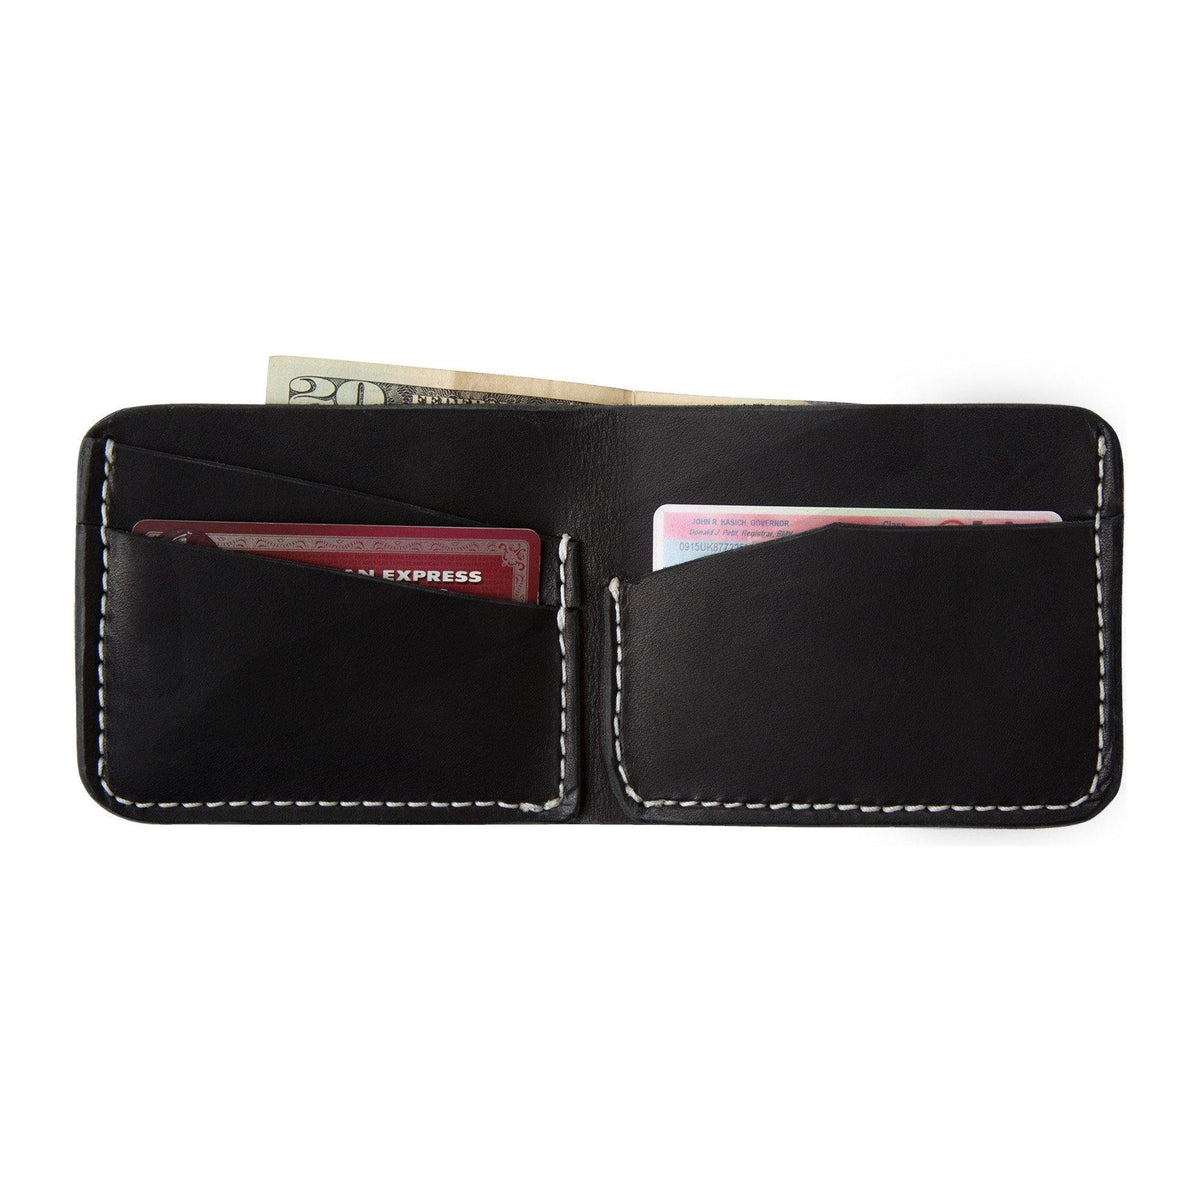 Sturdy Brothers The Standard Bifold Black Dublin by Sturdy Brothers